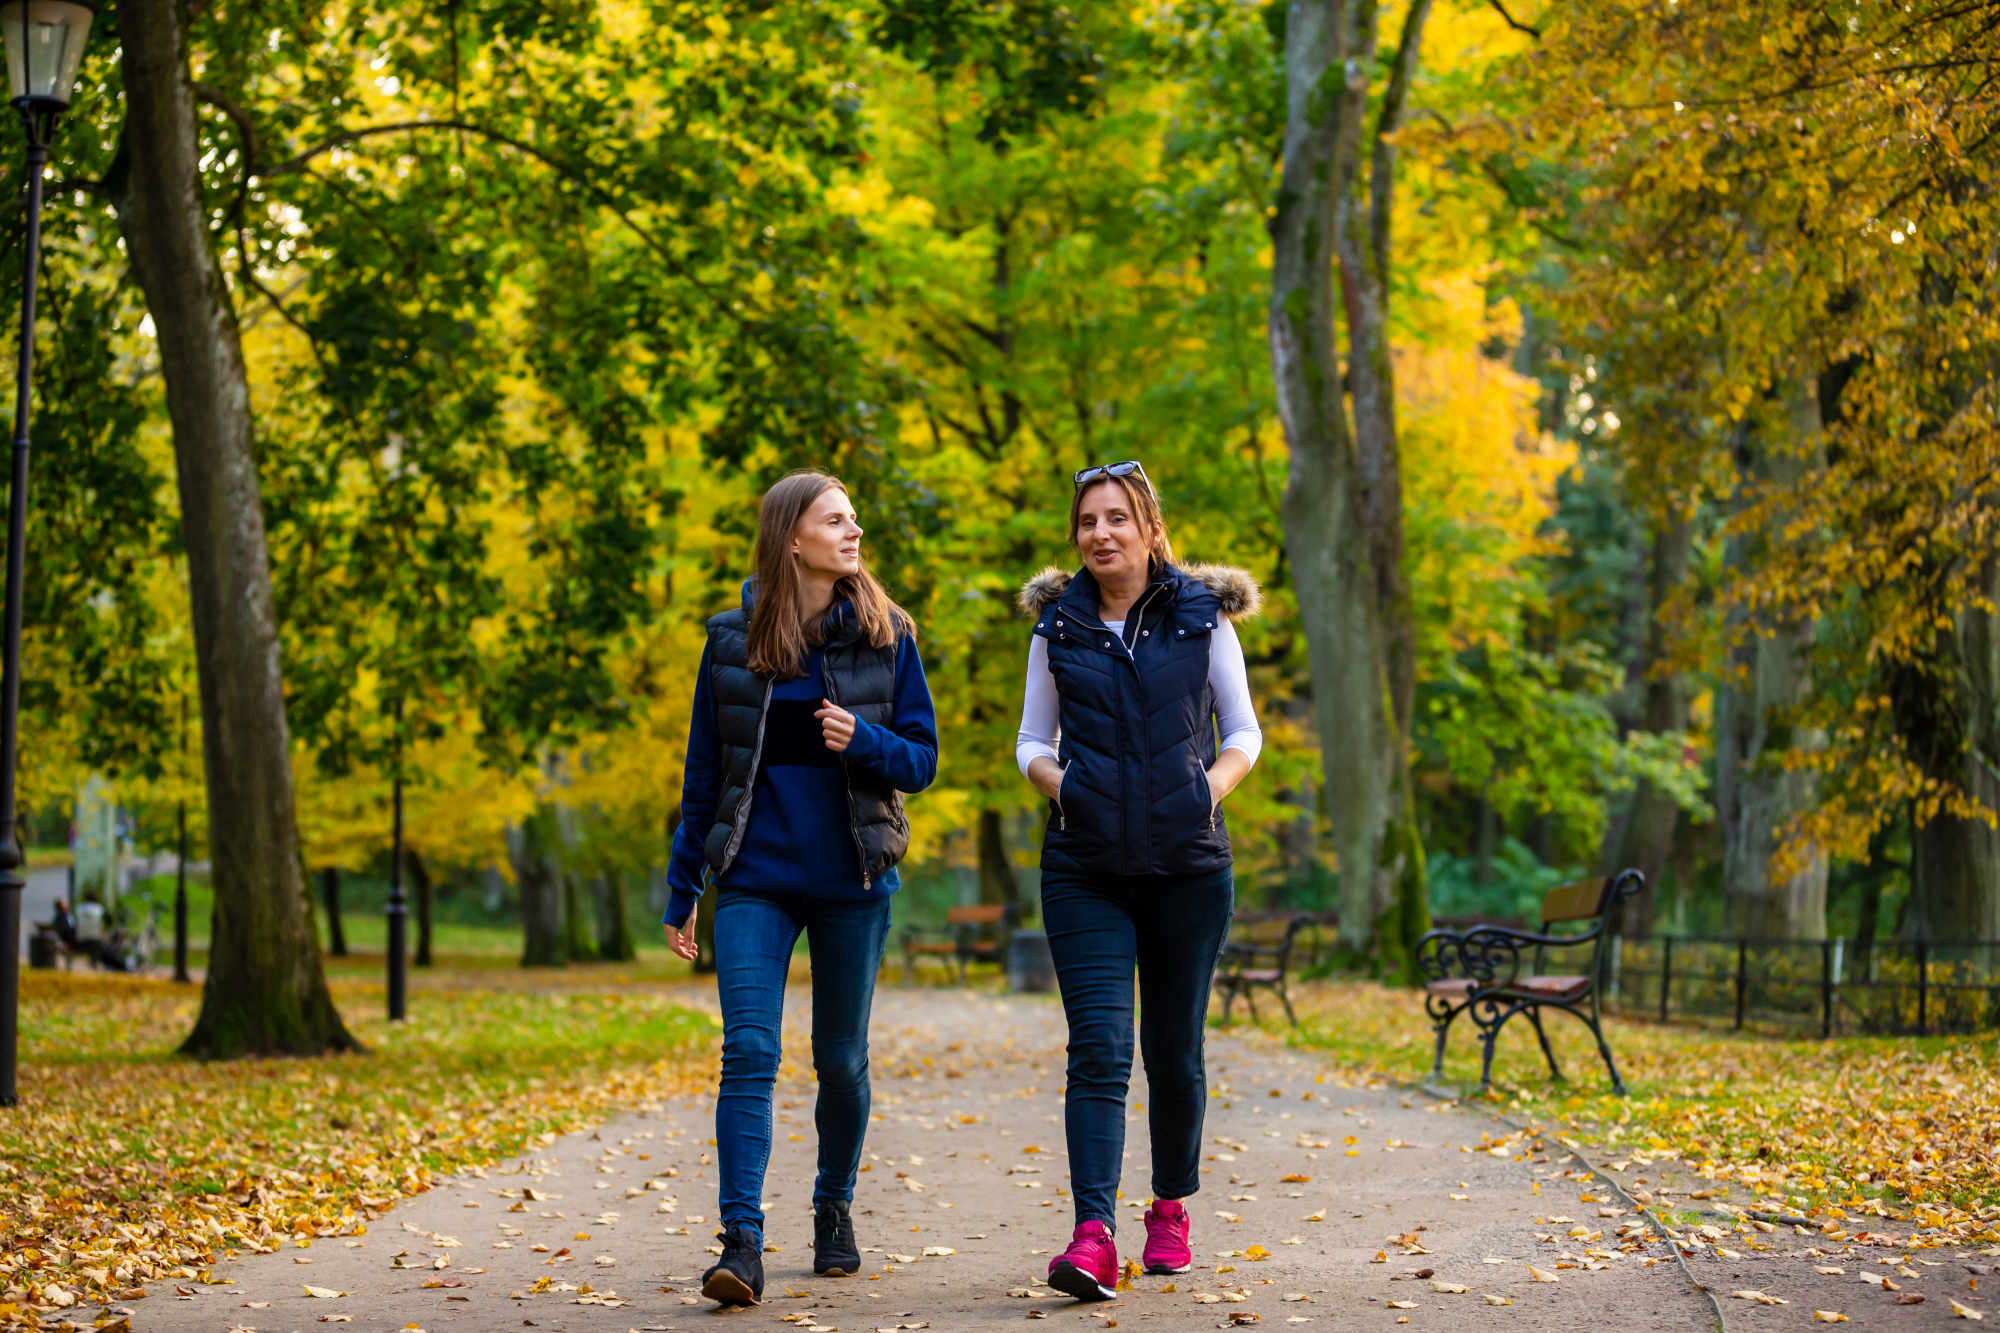 Two friends walking in a city park on a brisk fall day